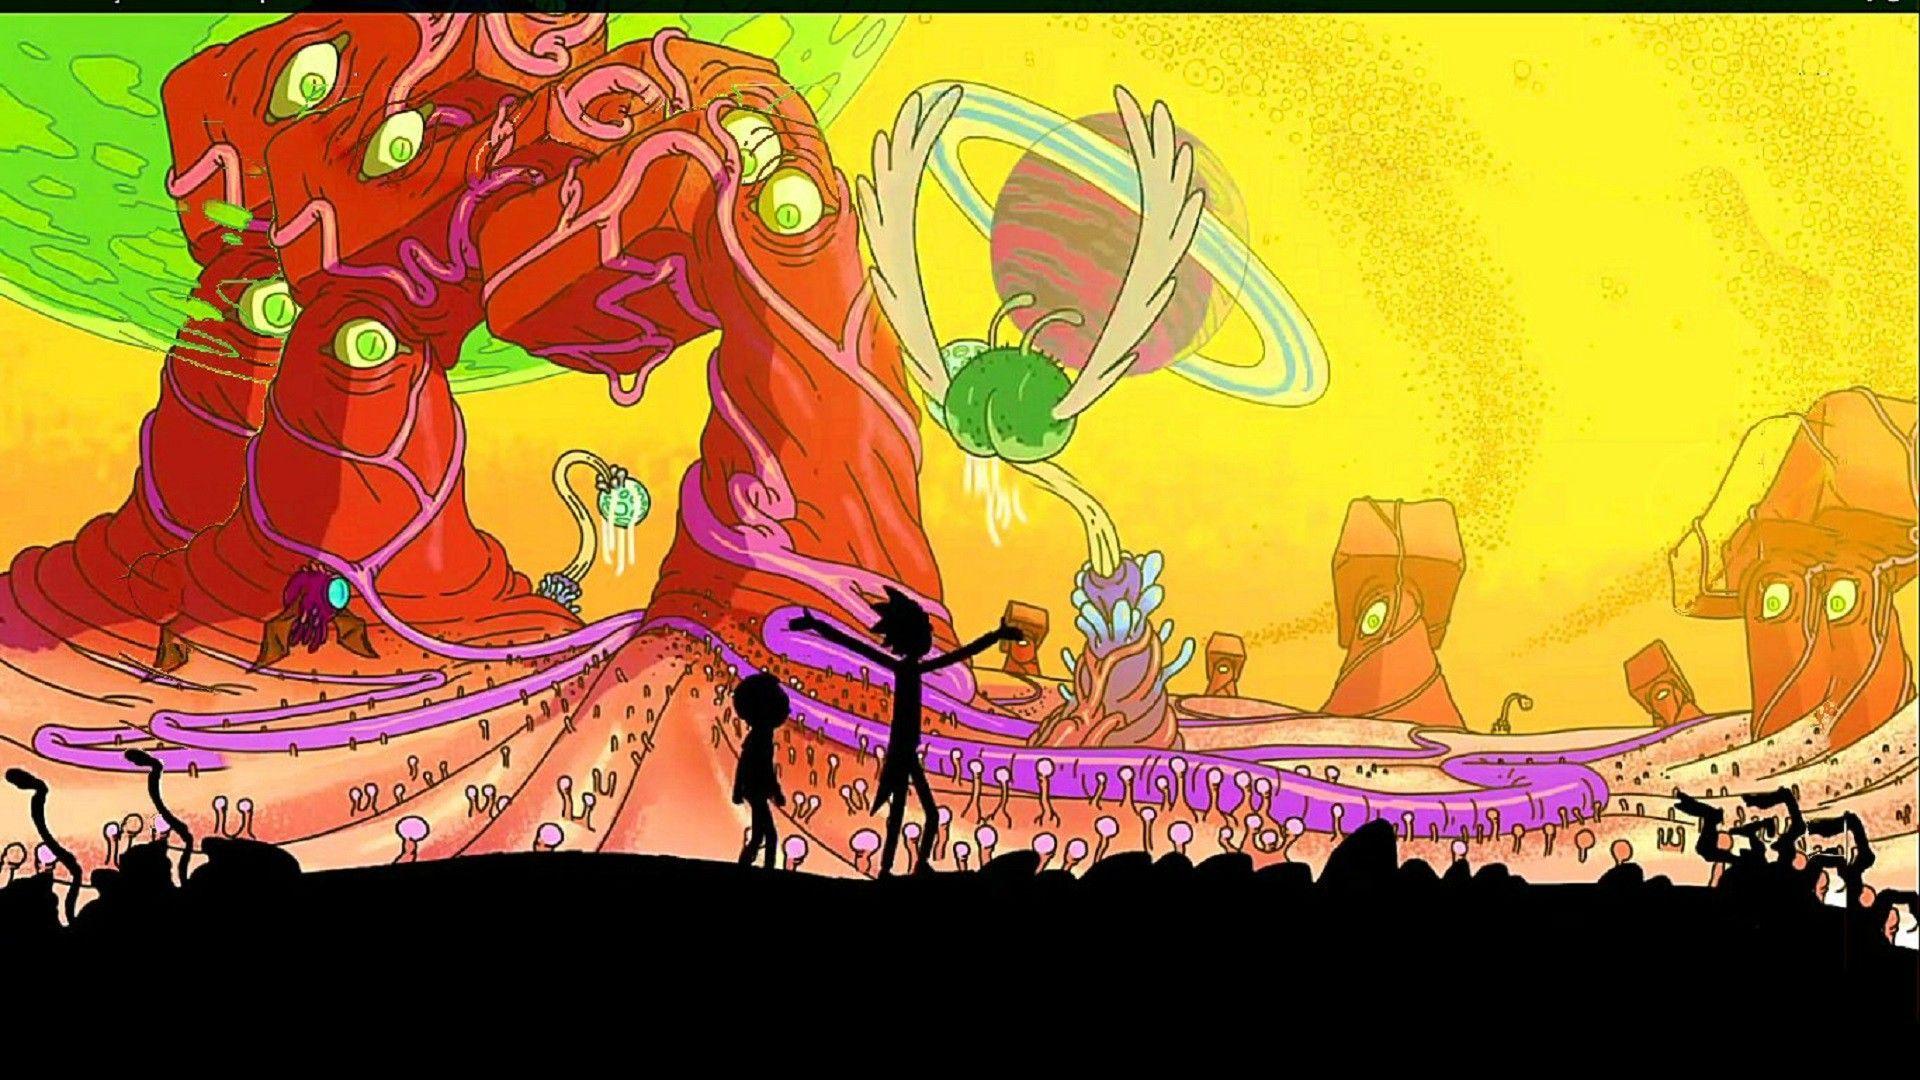 Steam WorkshopRick and Morty Trippy Wallpaper